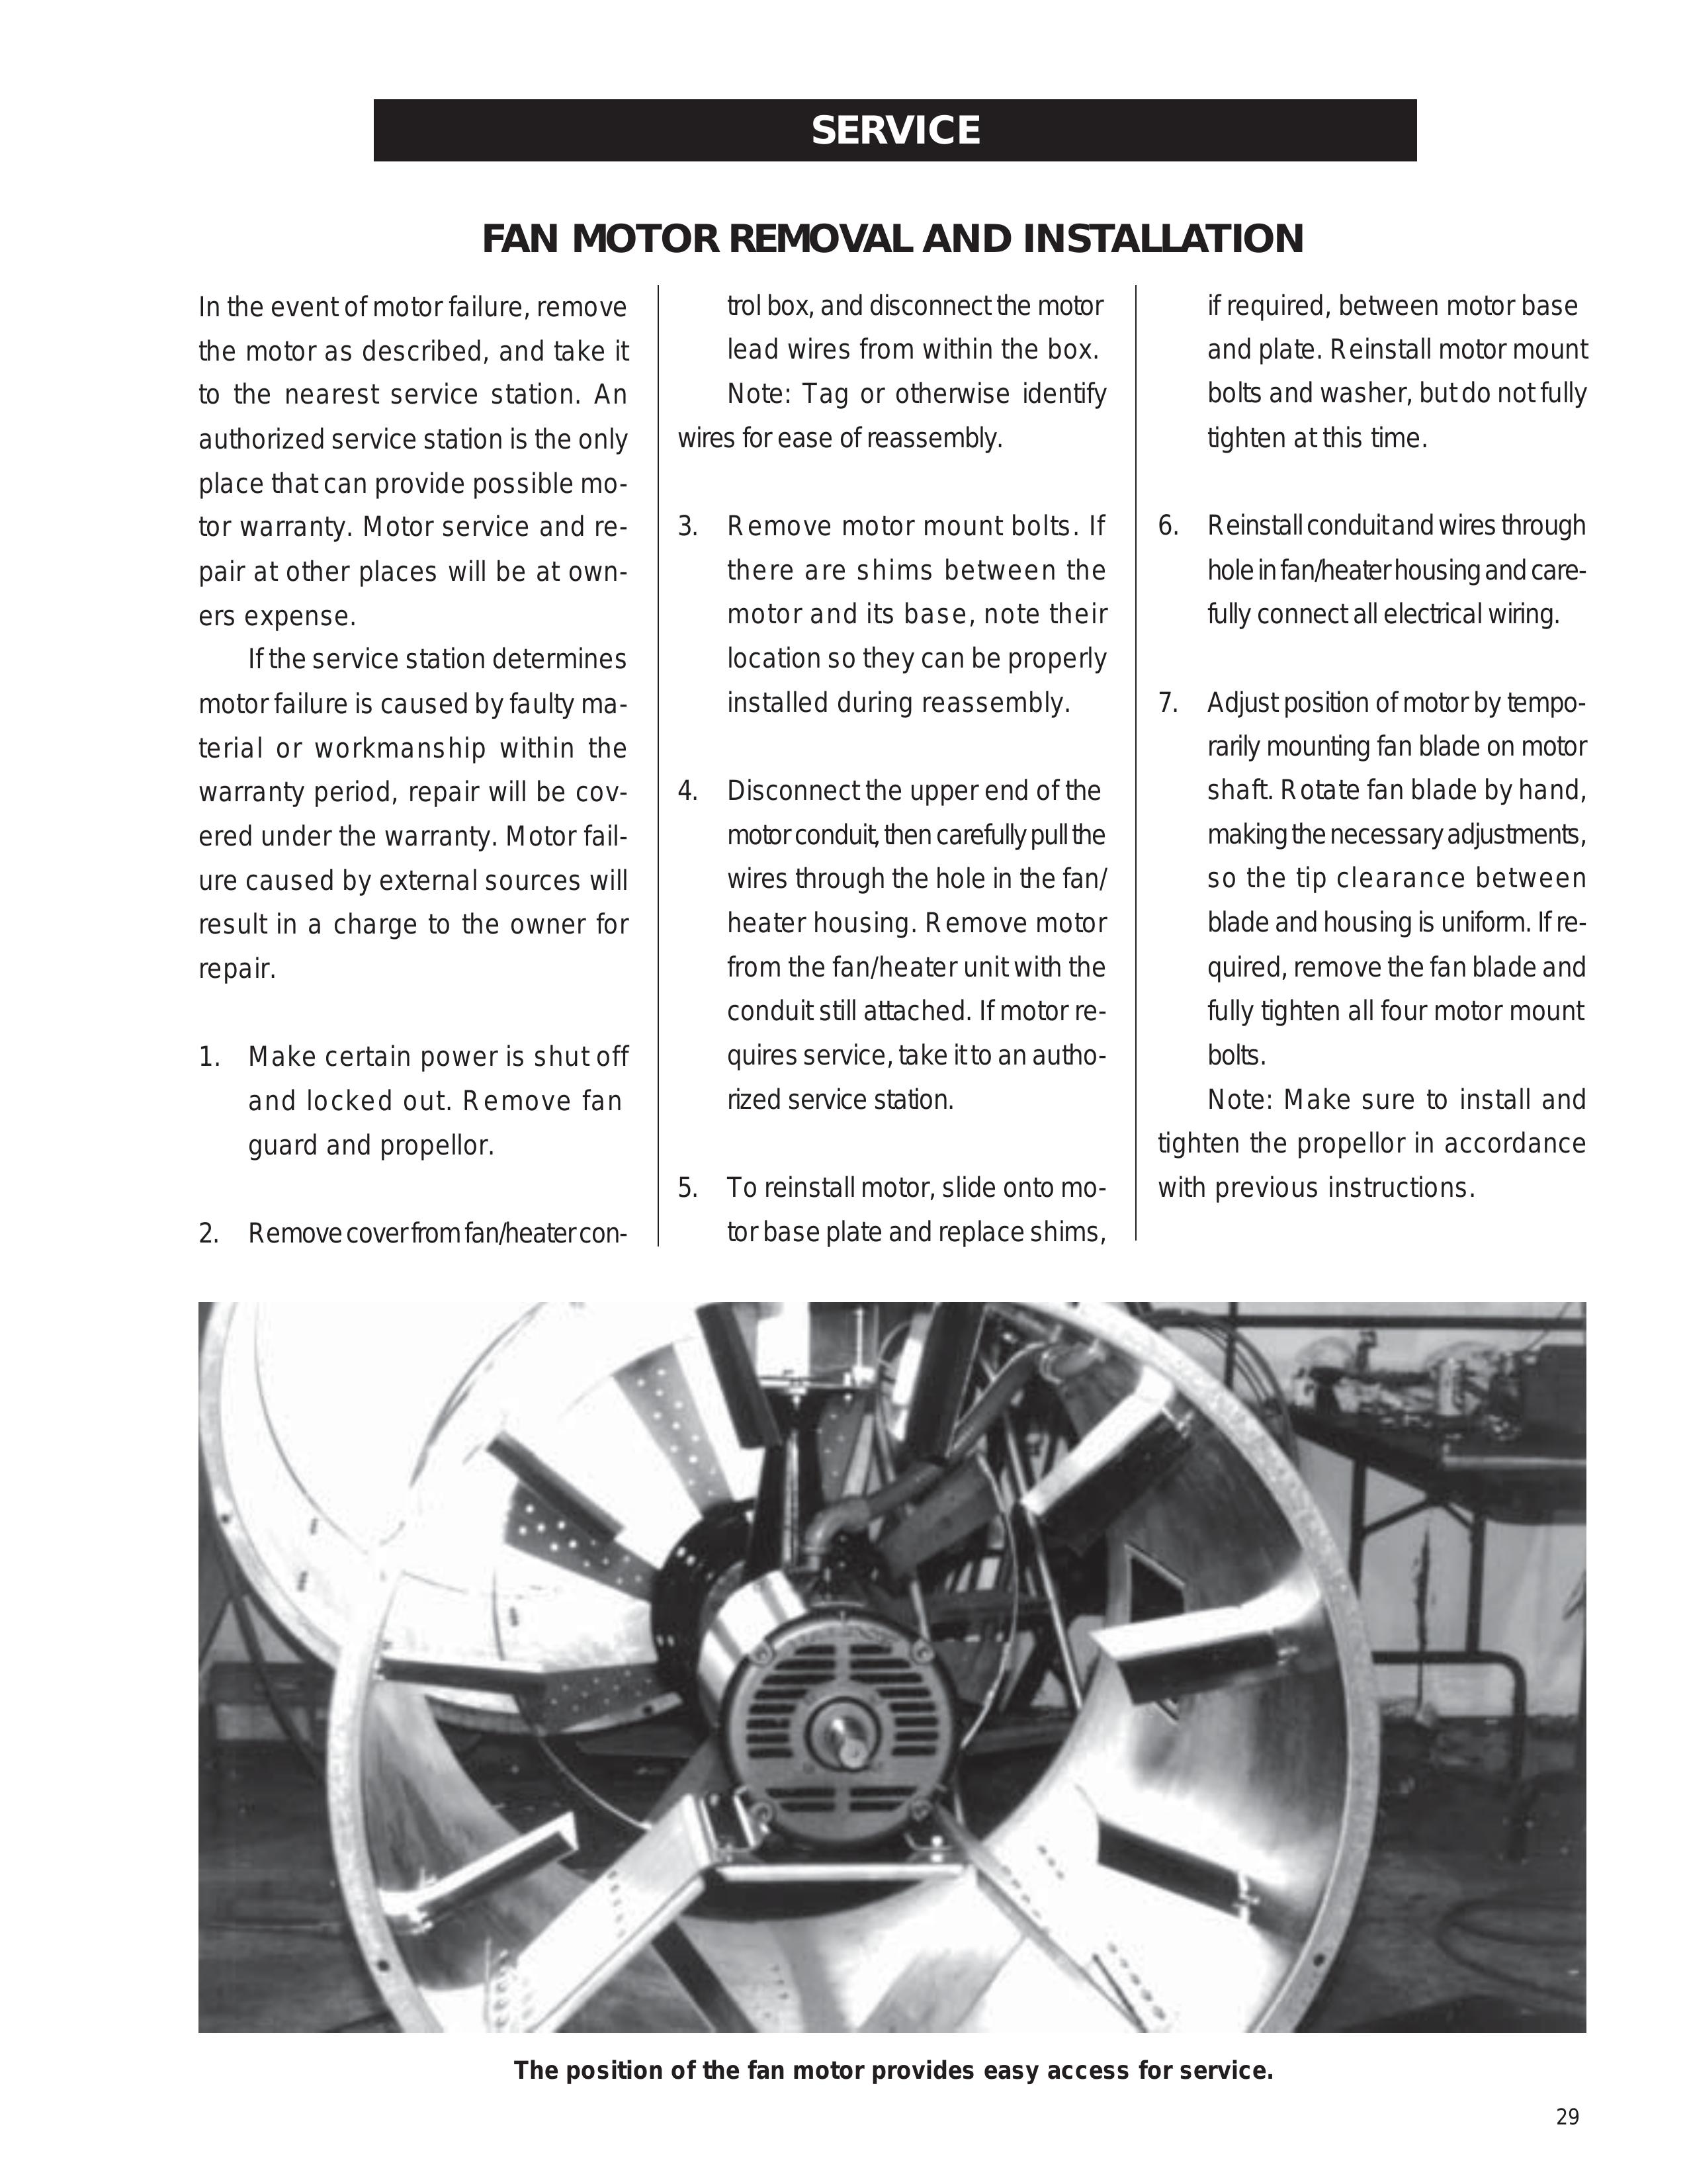 Airstream PNEG-343 Clothes Dryer User Manual (Page 29)